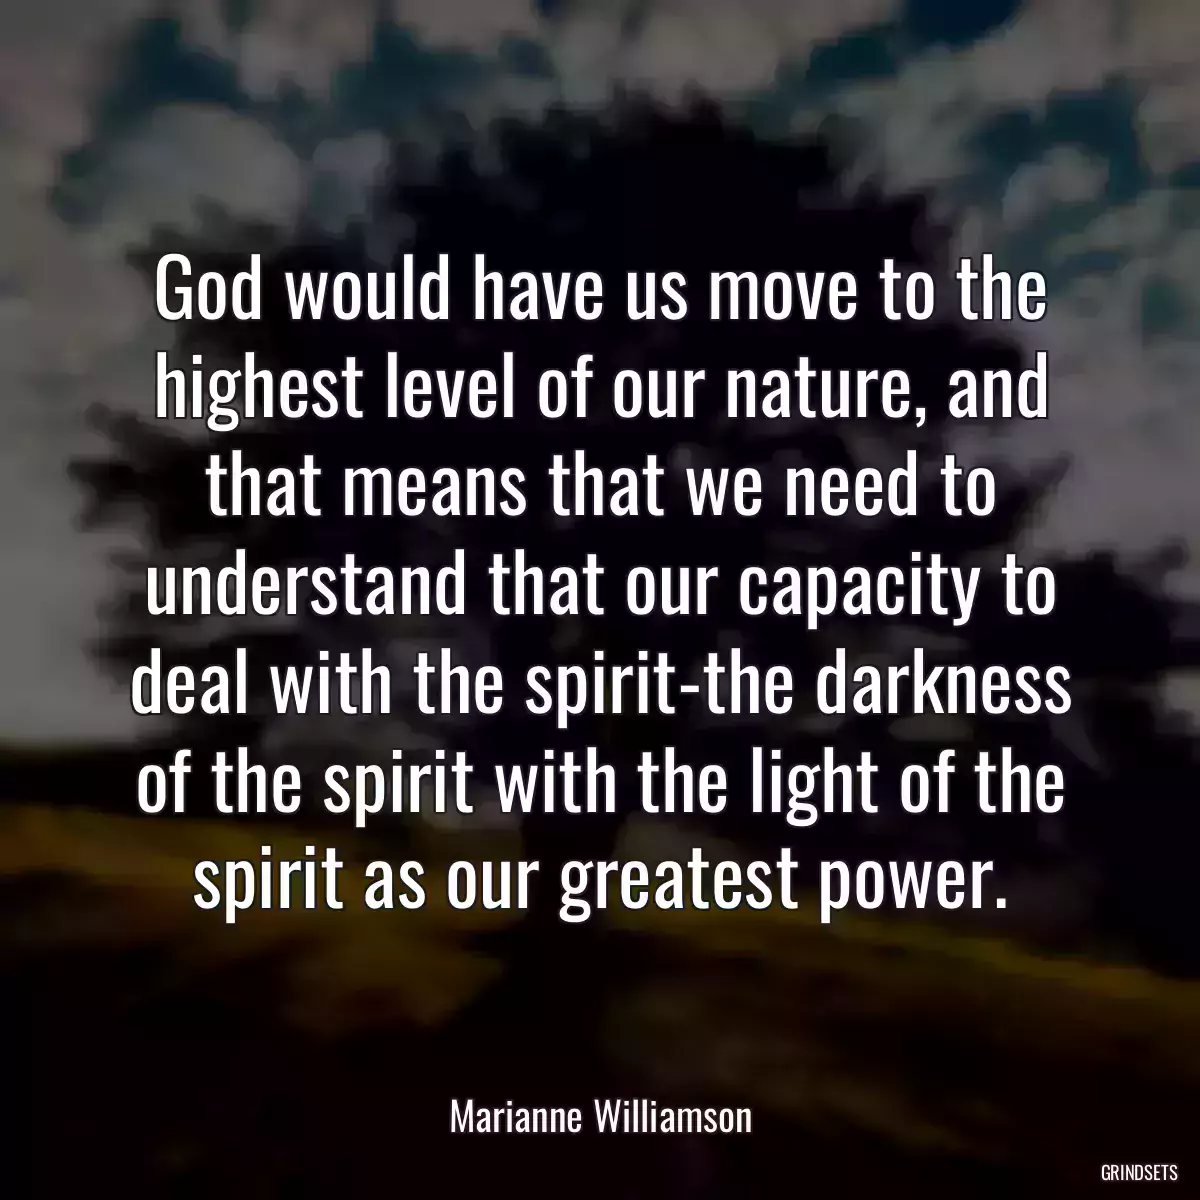 God would have us move to the highest level of our nature, and that means that we need to understand that our capacity to deal with the spirit-the darkness of the spirit with the light of the spirit as our greatest power.